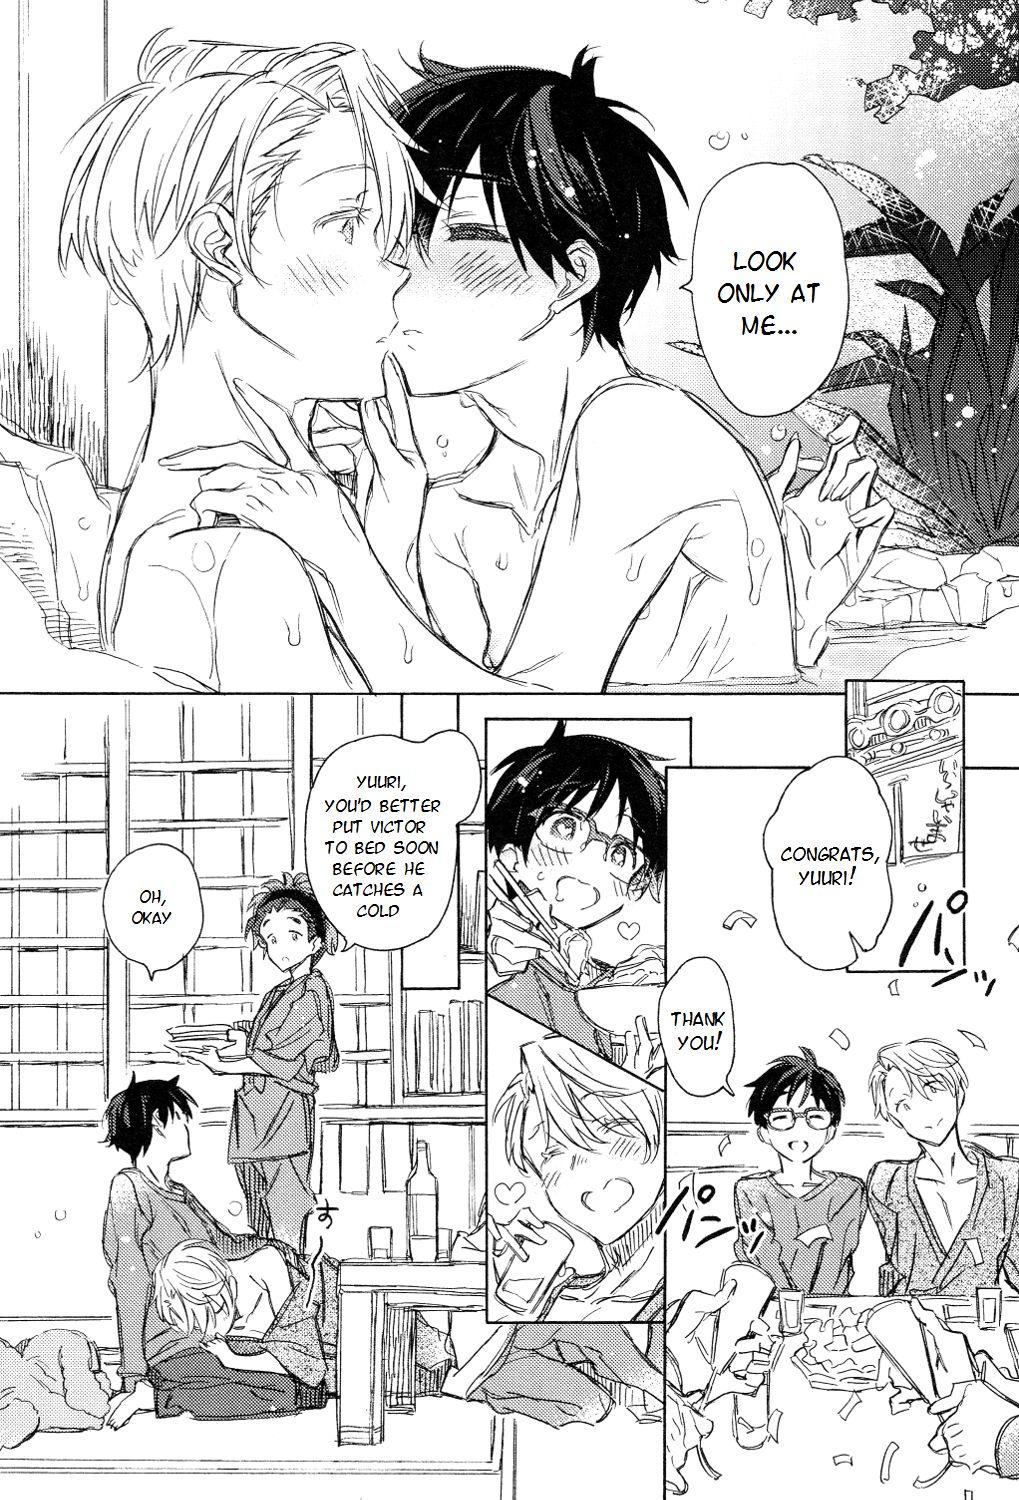 Panties BRAND NEW DAY,BRAND NEW LIFE - Yuri on ice Soloboy - Page 6